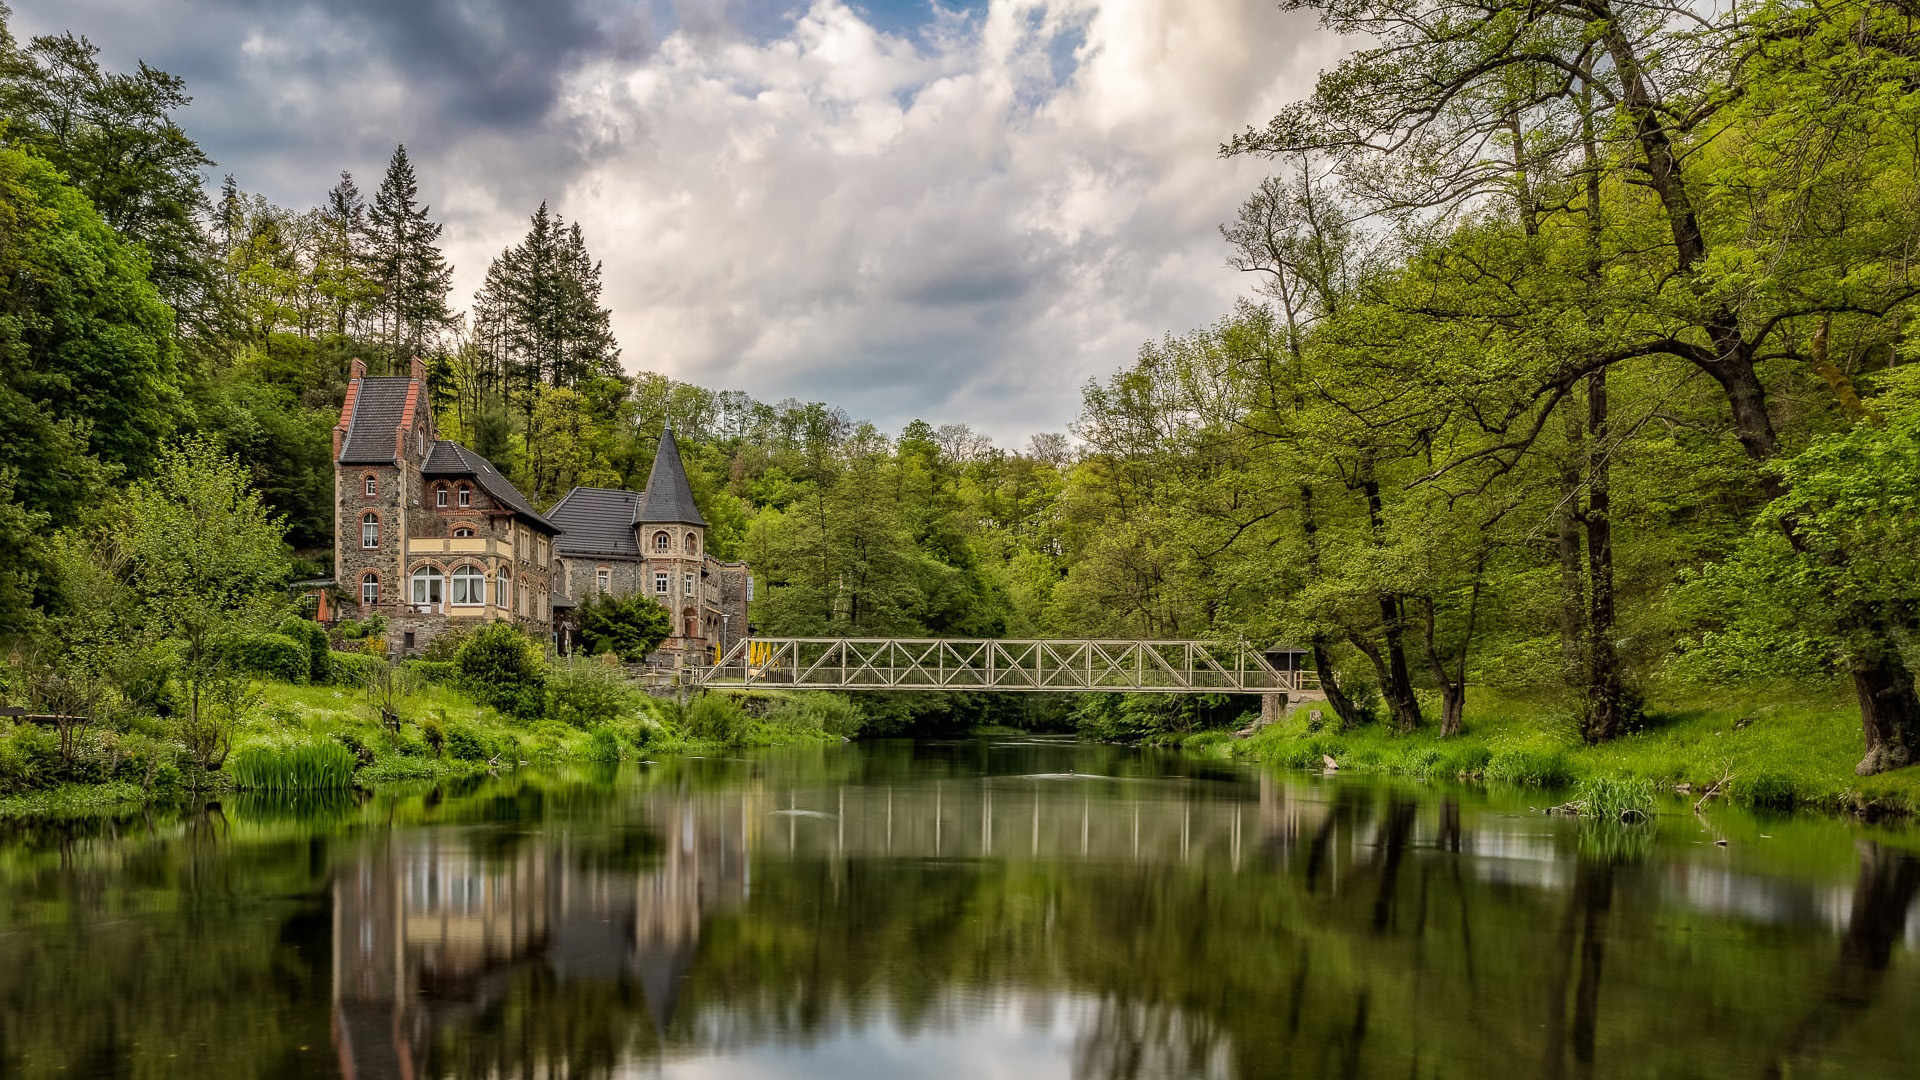 General 1920x1080 nature landscape trees lake bridge mansions reflection forest clouds Saxony Germany